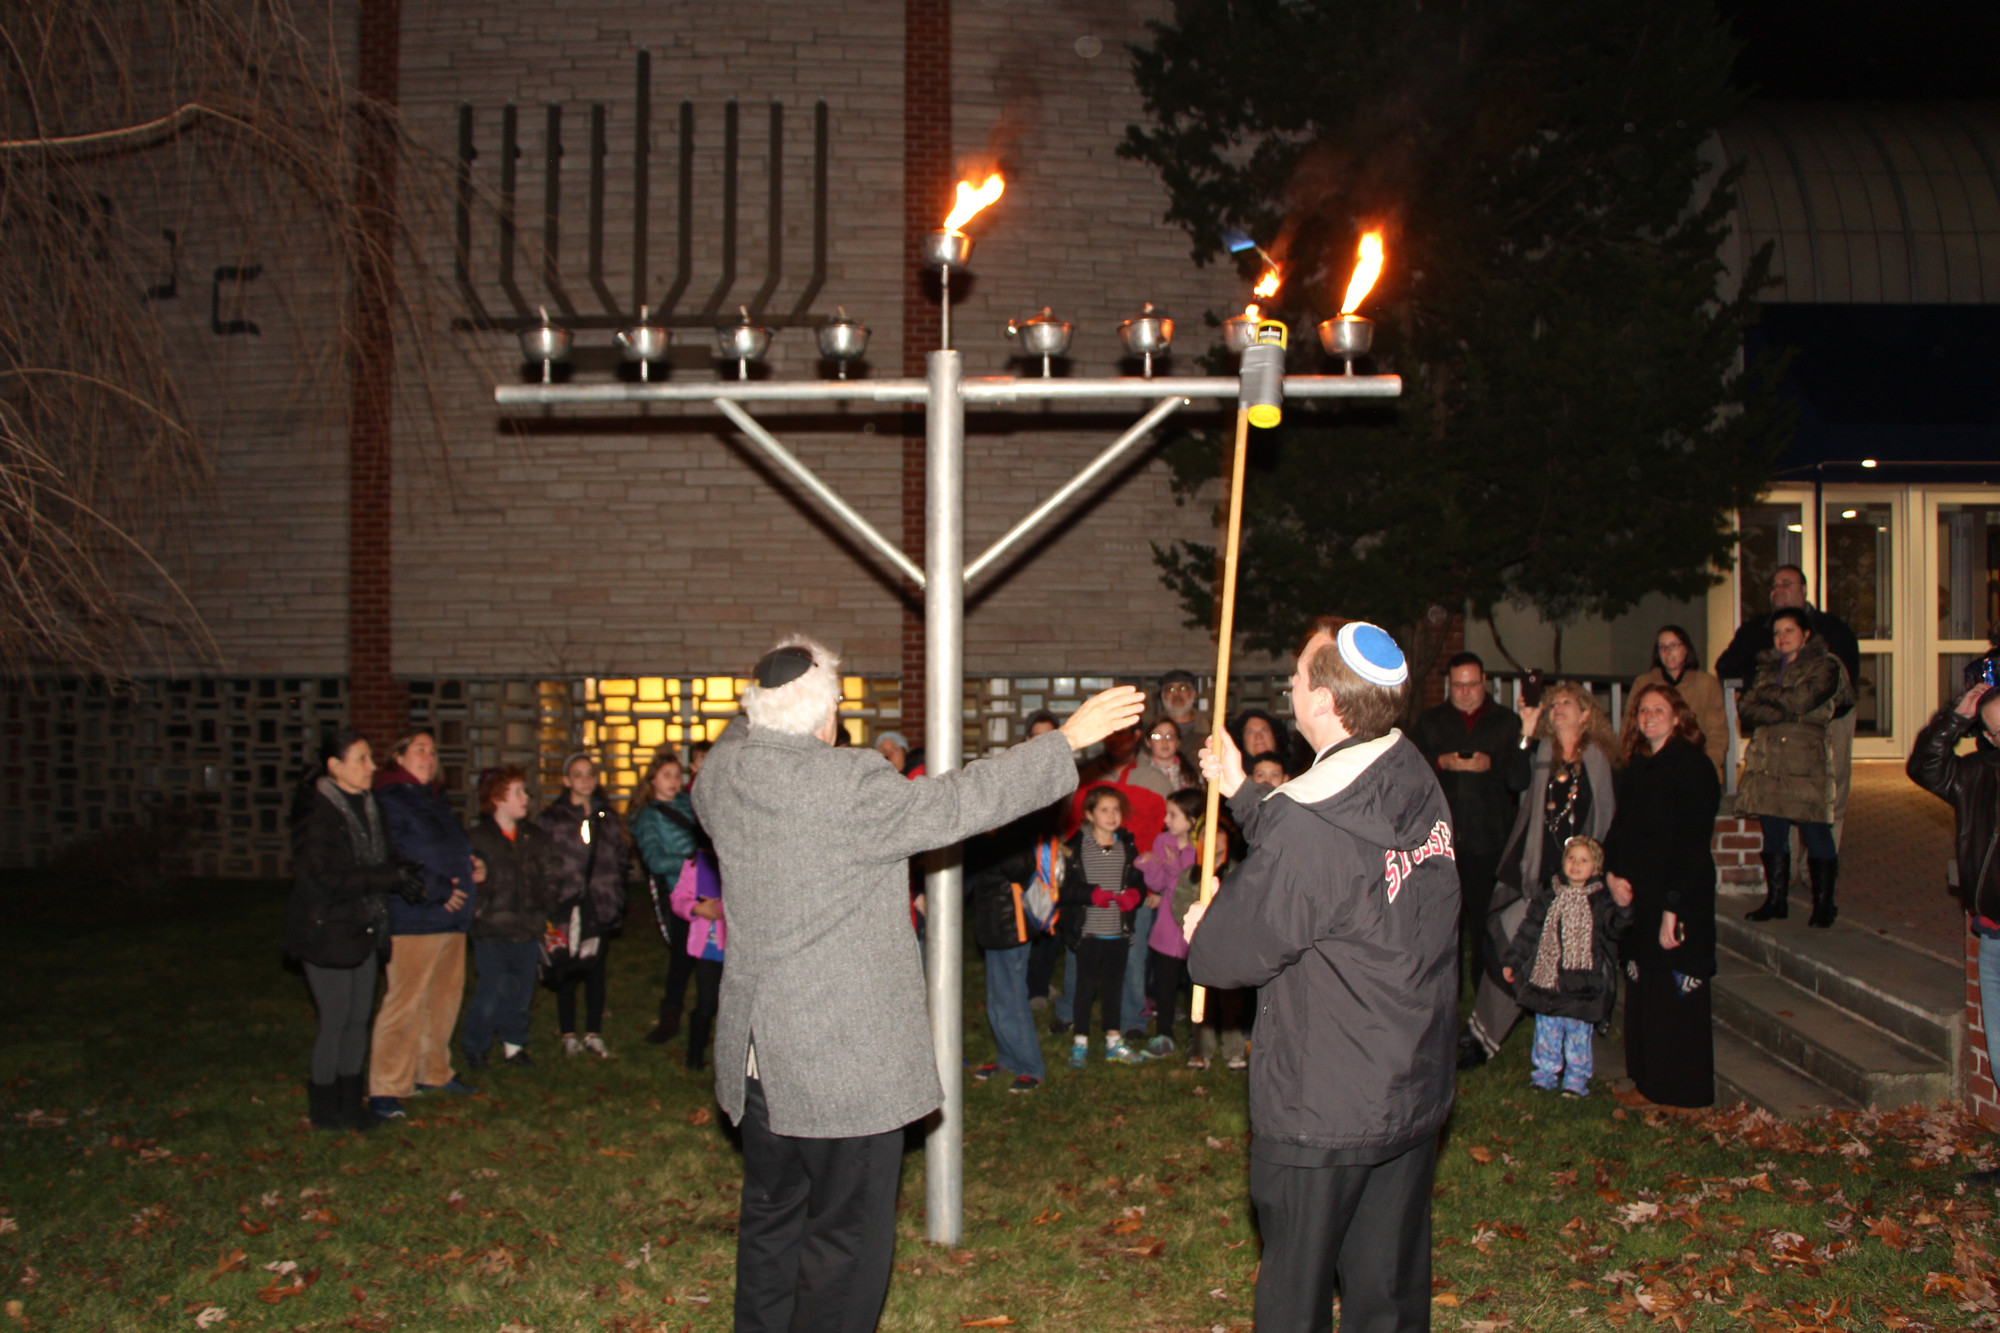 Scott Eckers, an East Meadow School District Board of Education trustee, lit the second candle on the East Meadow Jewish Center’s oversized menorah. The menorah is located on the front lawn of the temple, at 1400 Prospect Ave.